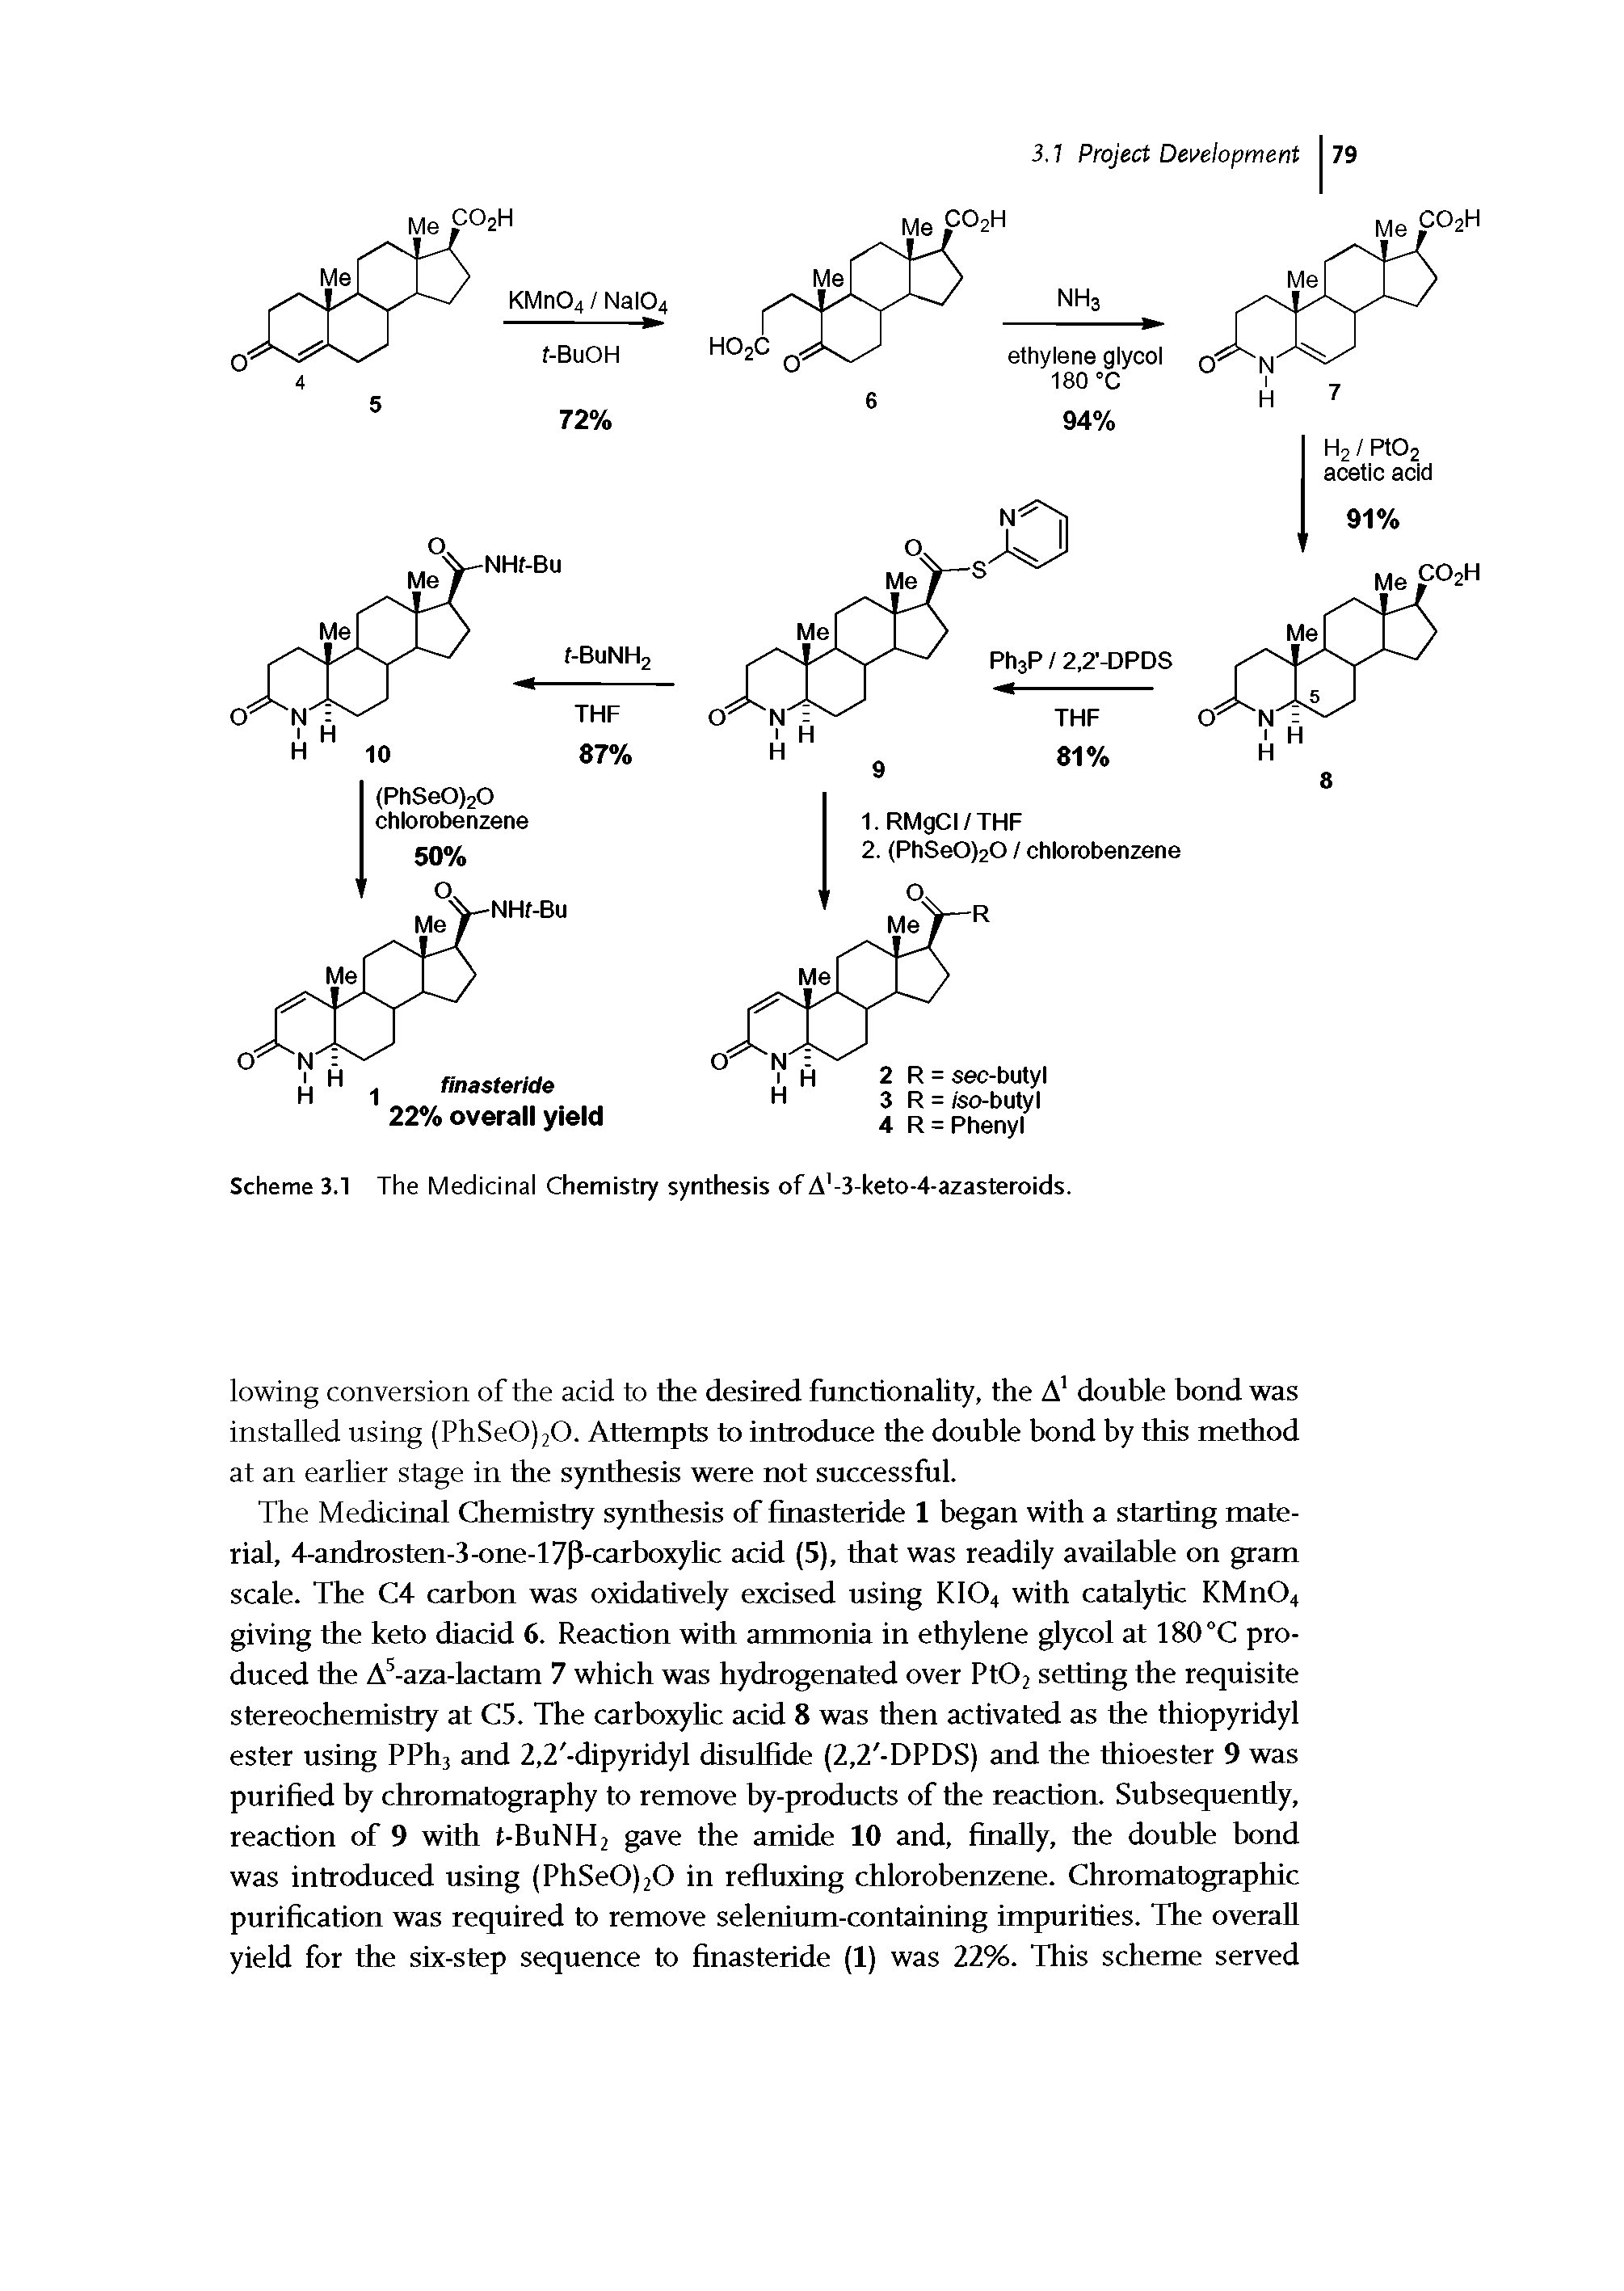 Scheme 3.1 The Medicinal Chemistry synthesis of A -3-keto-4-azasteroids.